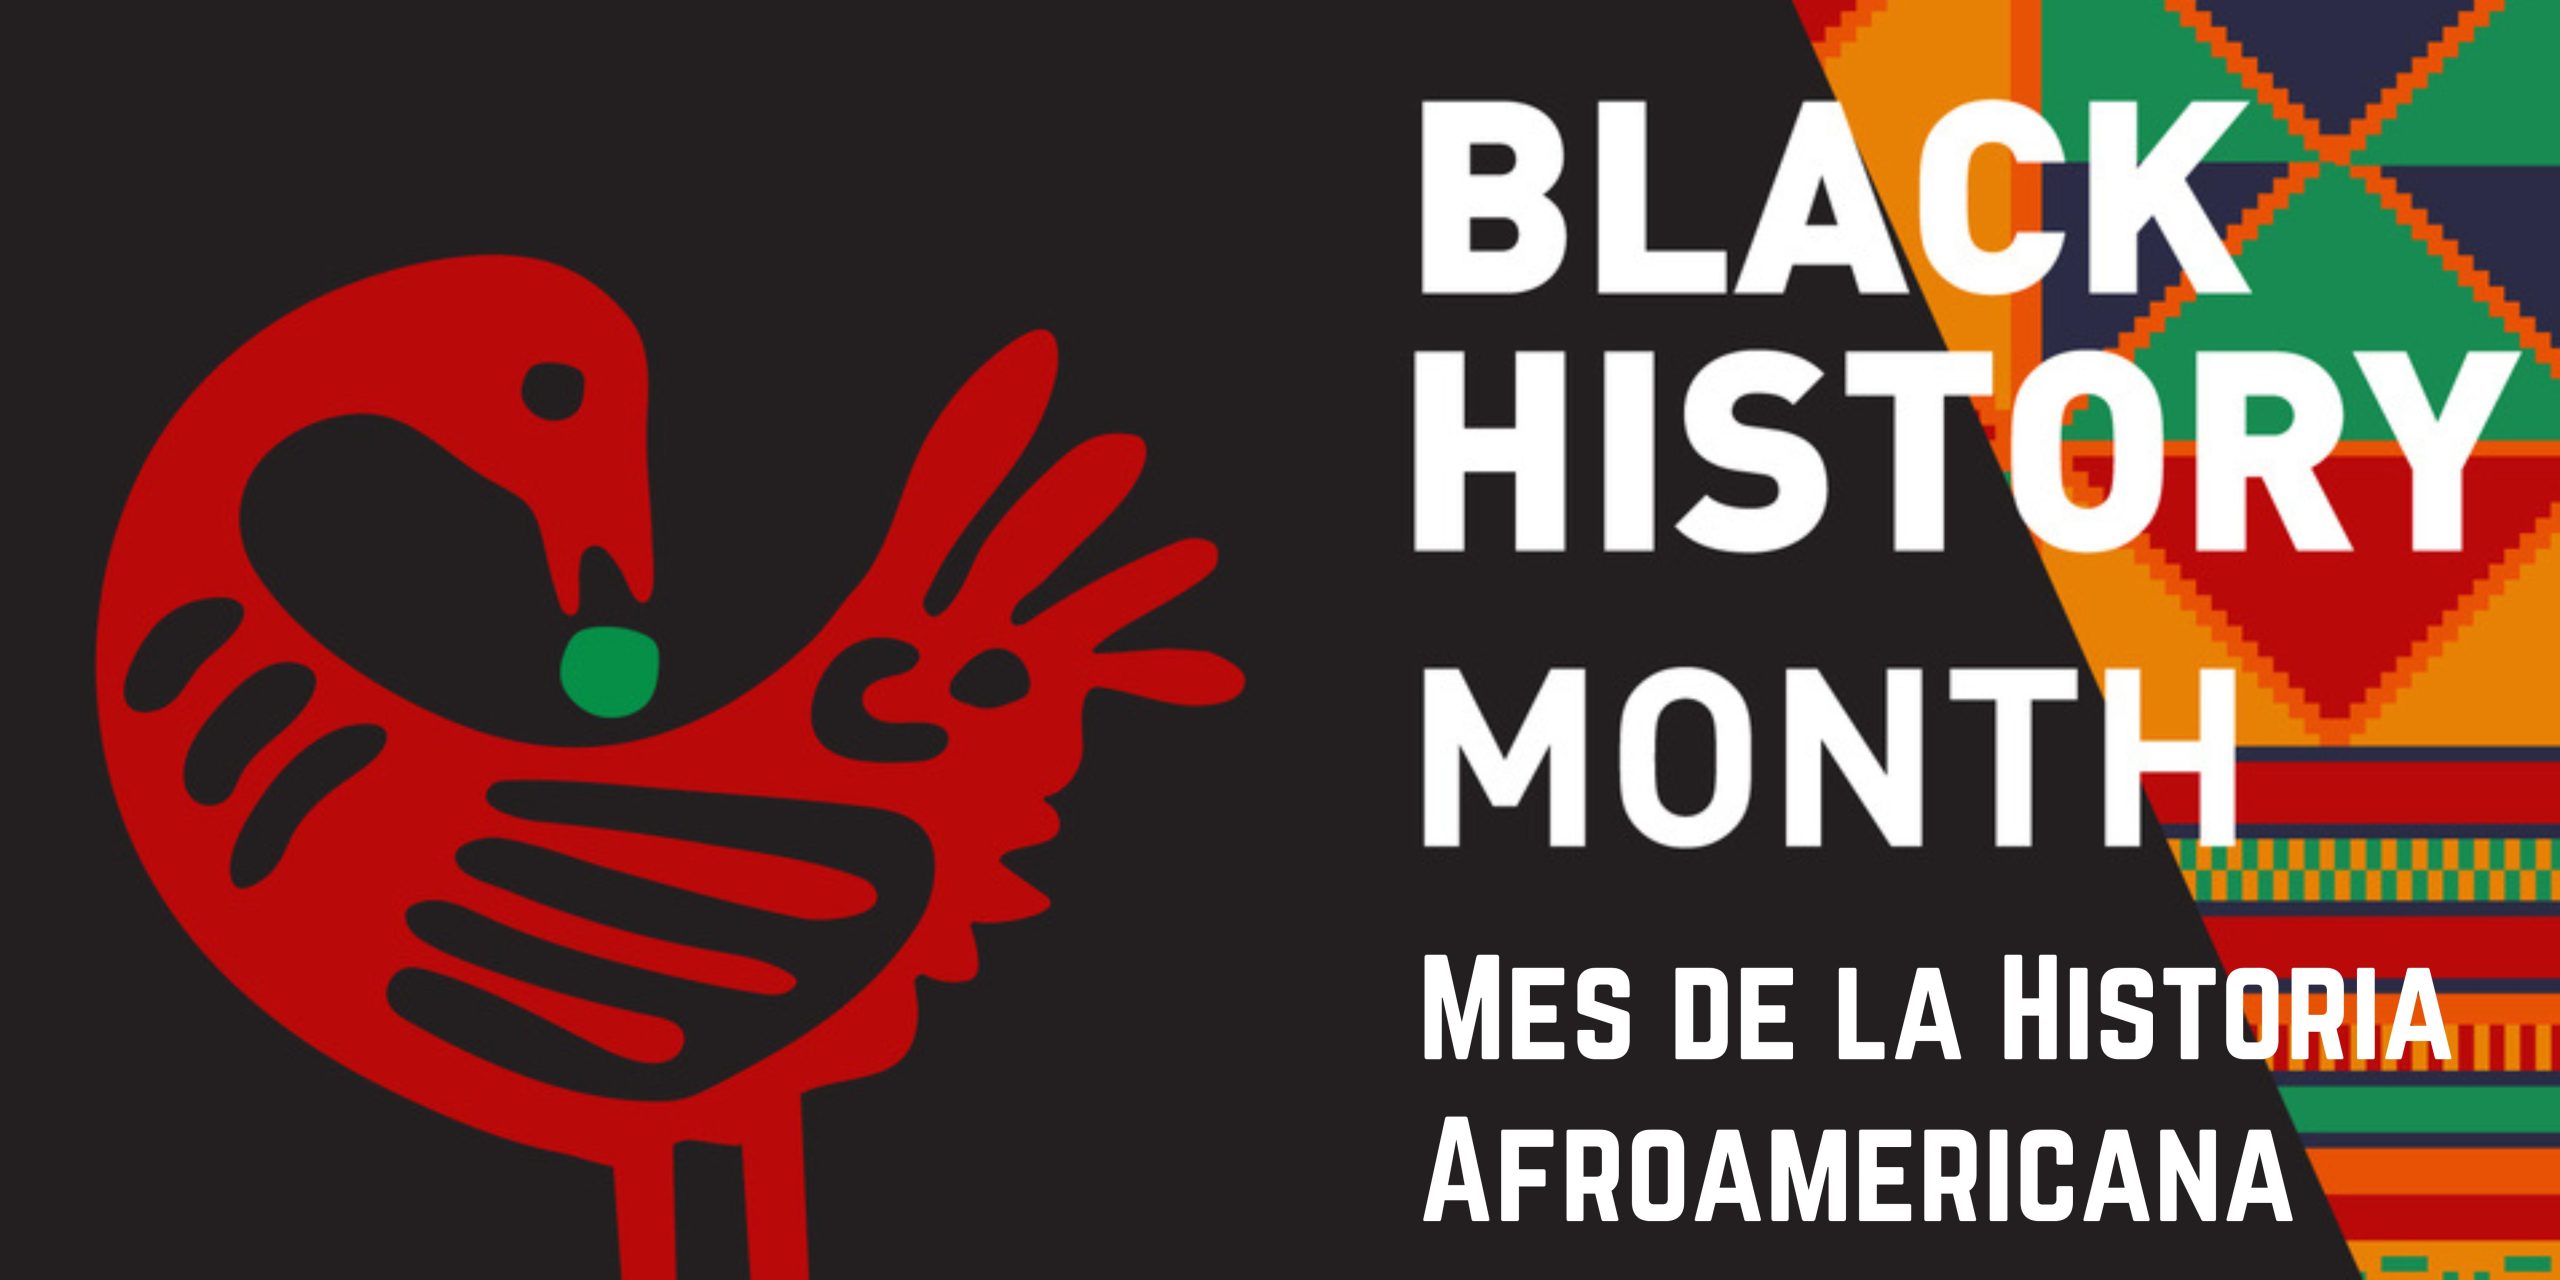 Black background with art graphic of a red bird on left side.. White text on right side says, "Black History Month. Mes de la Historia Afroamericana"